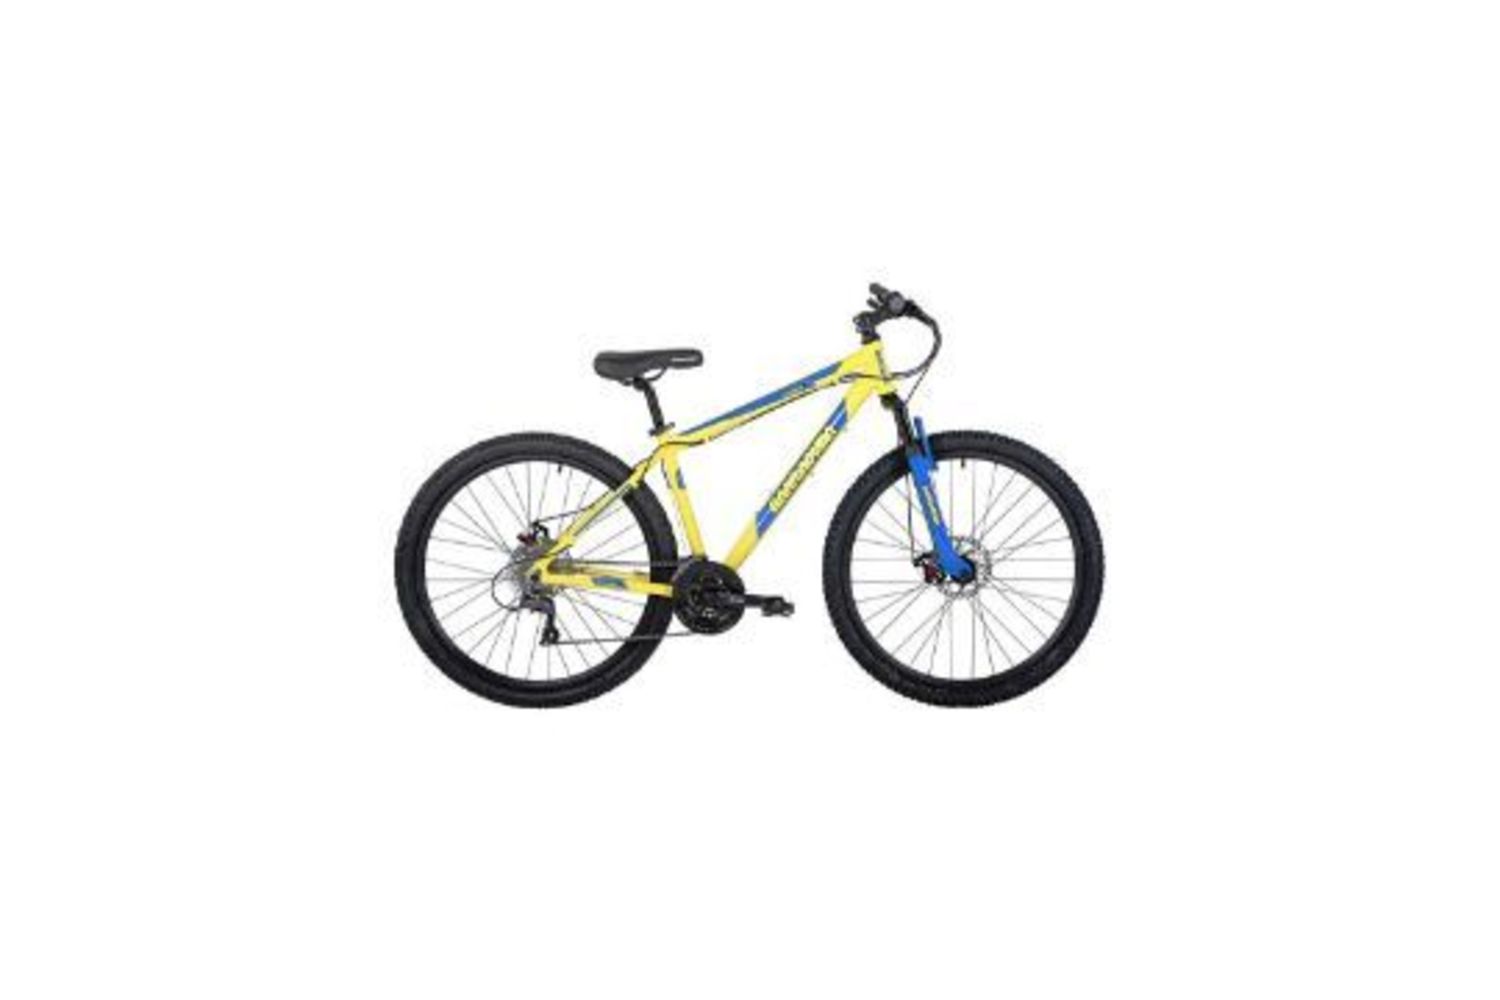 New & Boxed Bikes including Electric, Mountain Bikes, Children's Bikes | Brands Such as Romet, Barracuda, Lectro, Sonic etc - Delivery Available